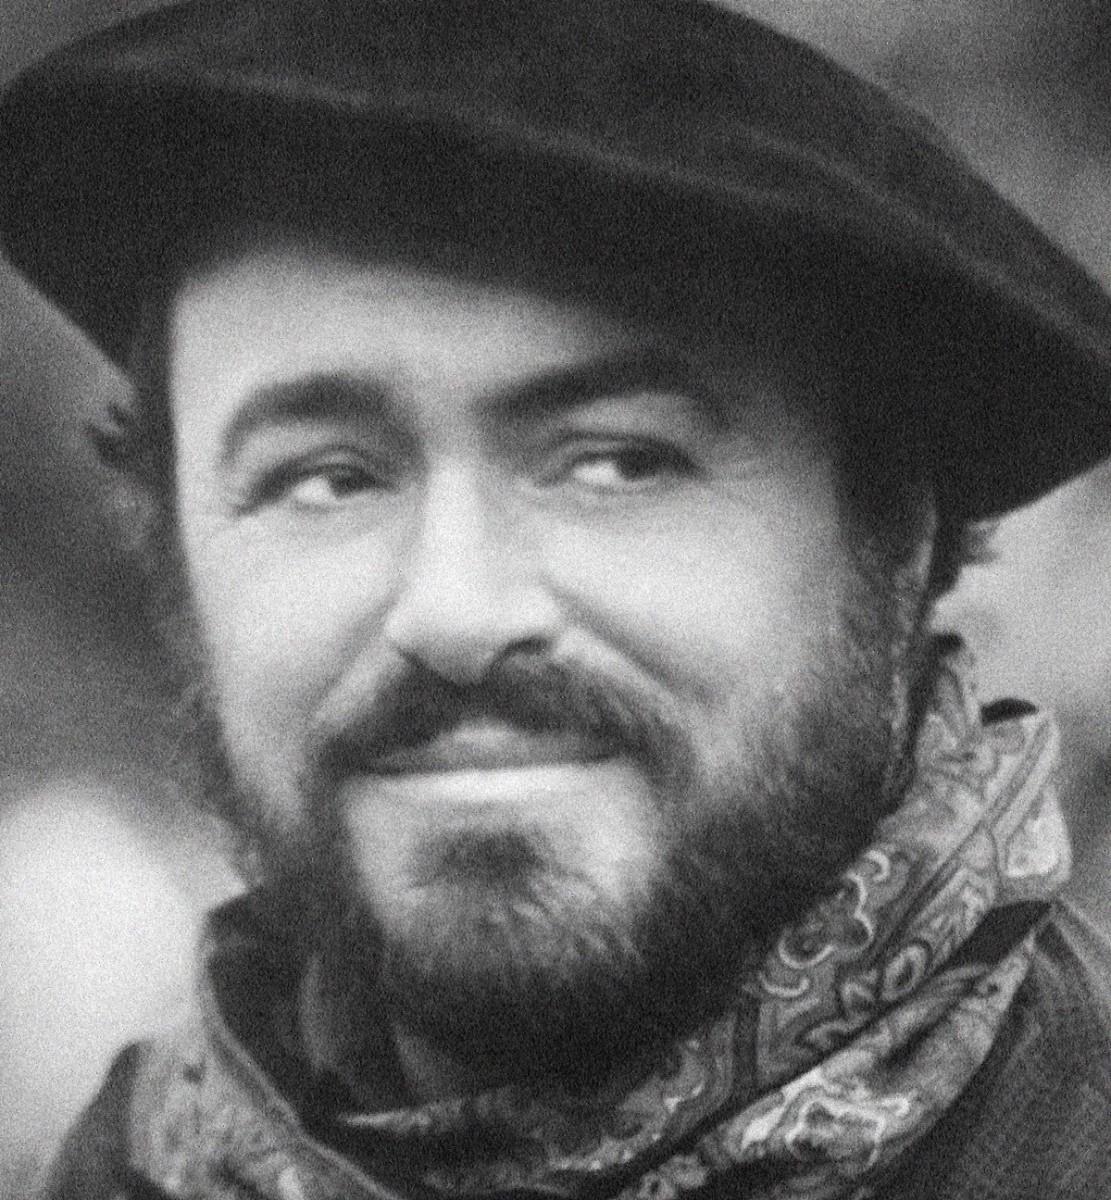 Luciano Pavarotti photo of pics, wallpapers